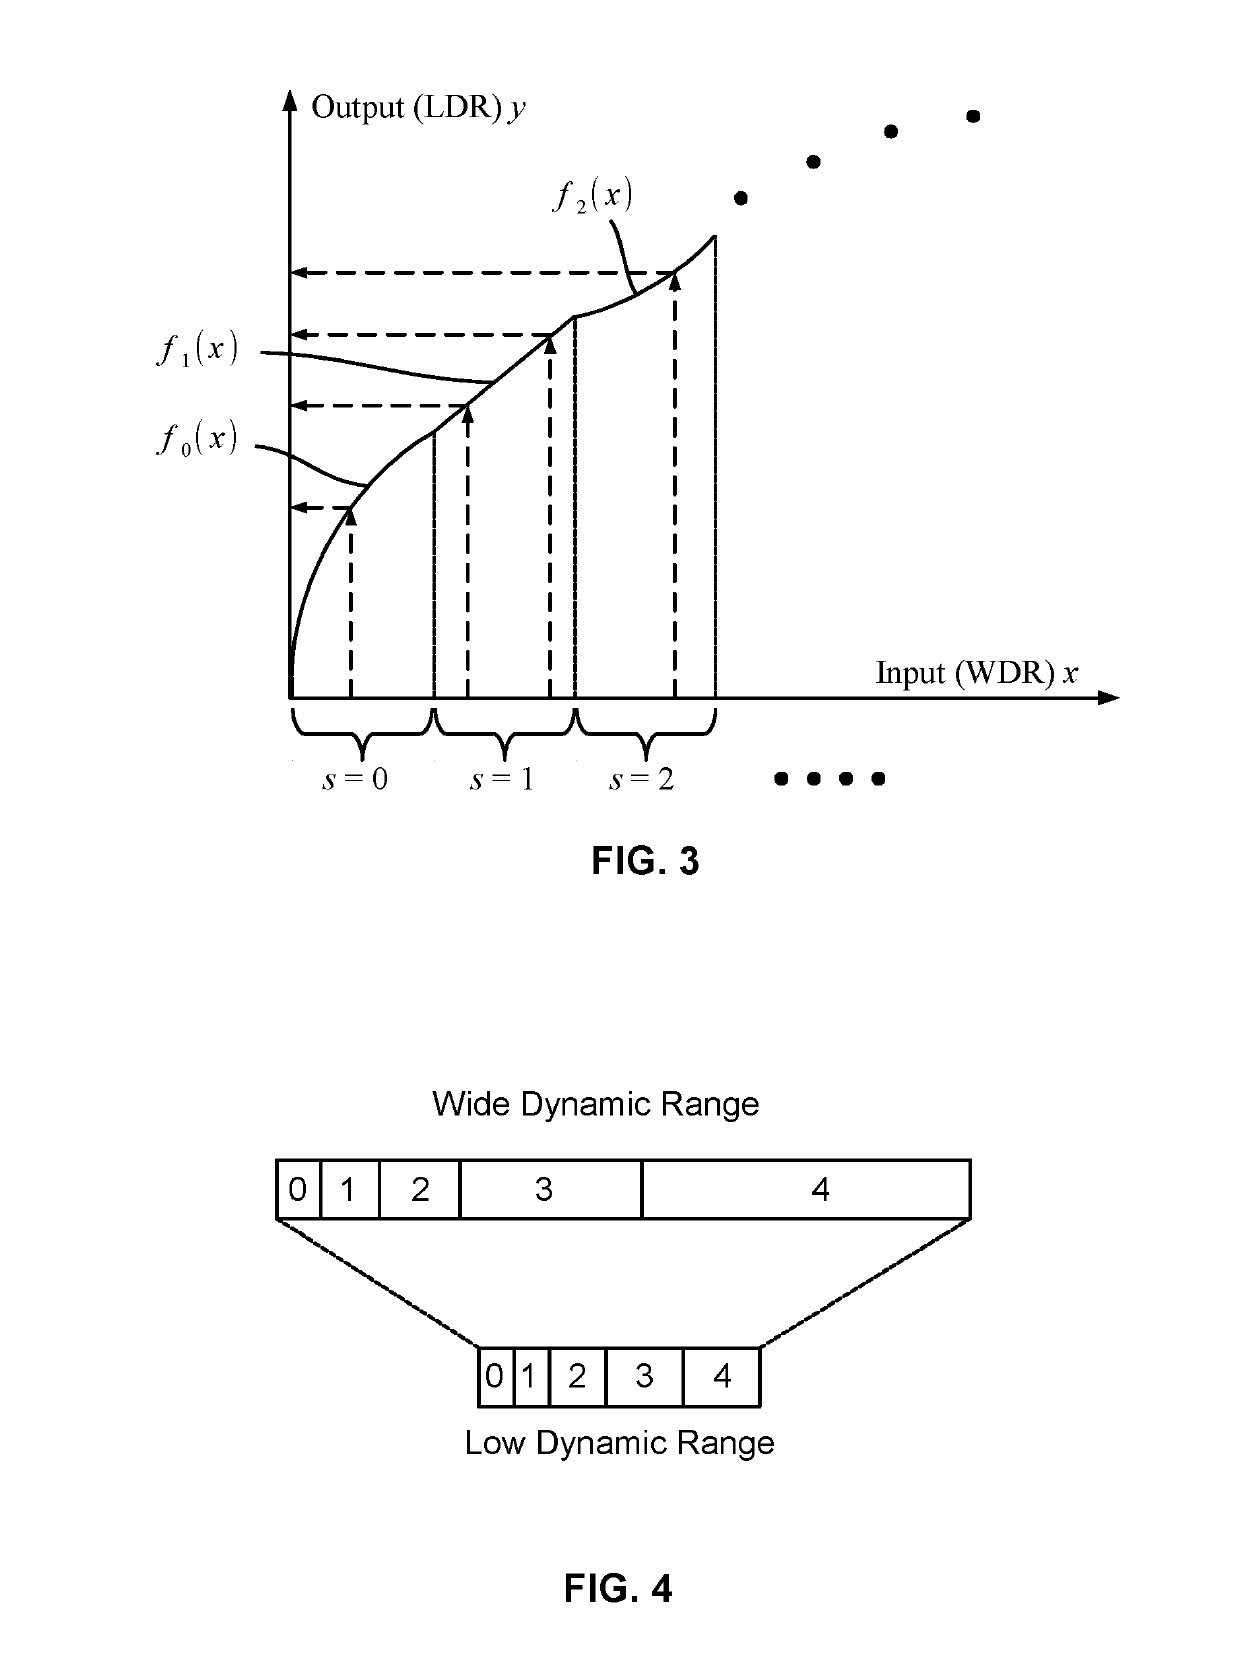 Method of presenting wide dynamic range images and a system employing same